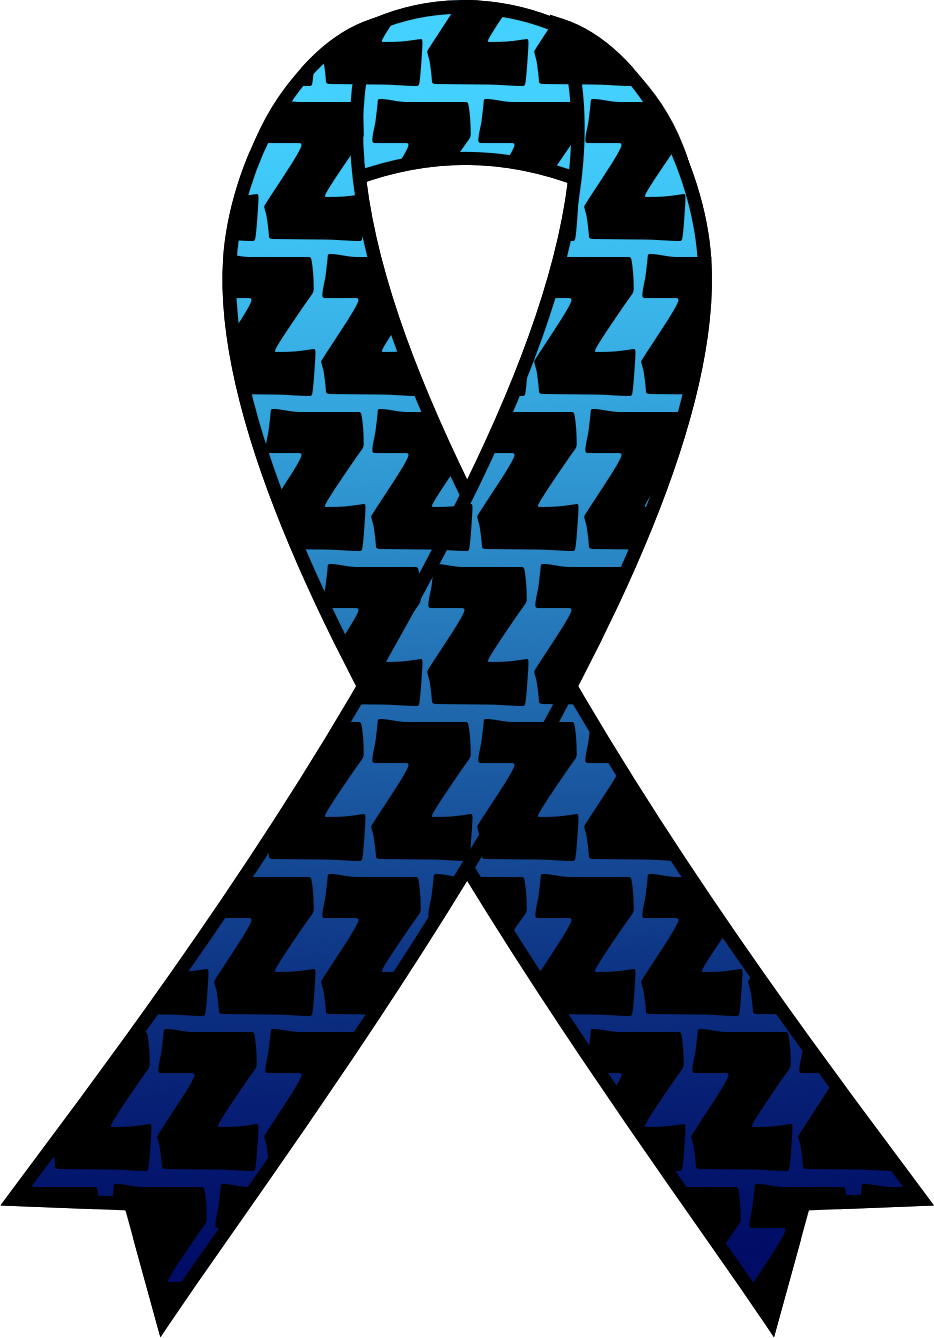 Announcing The Idiopathic Hypersomnia Awareness Ribbon - Idiopathic Hypersomnia Awareness Ribbon (934x1338)